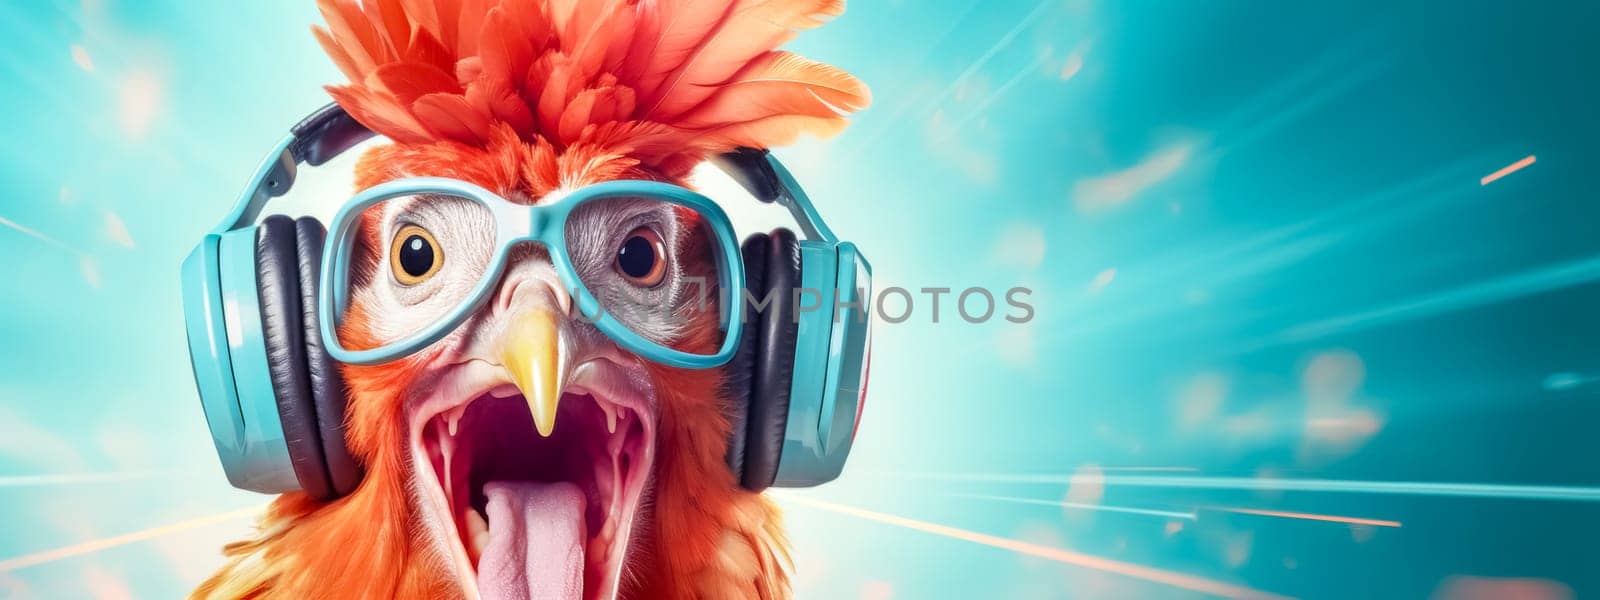 Vibrant illustration of a chicken wearing headphones, ready to jam at a party with a cool blue backdrop